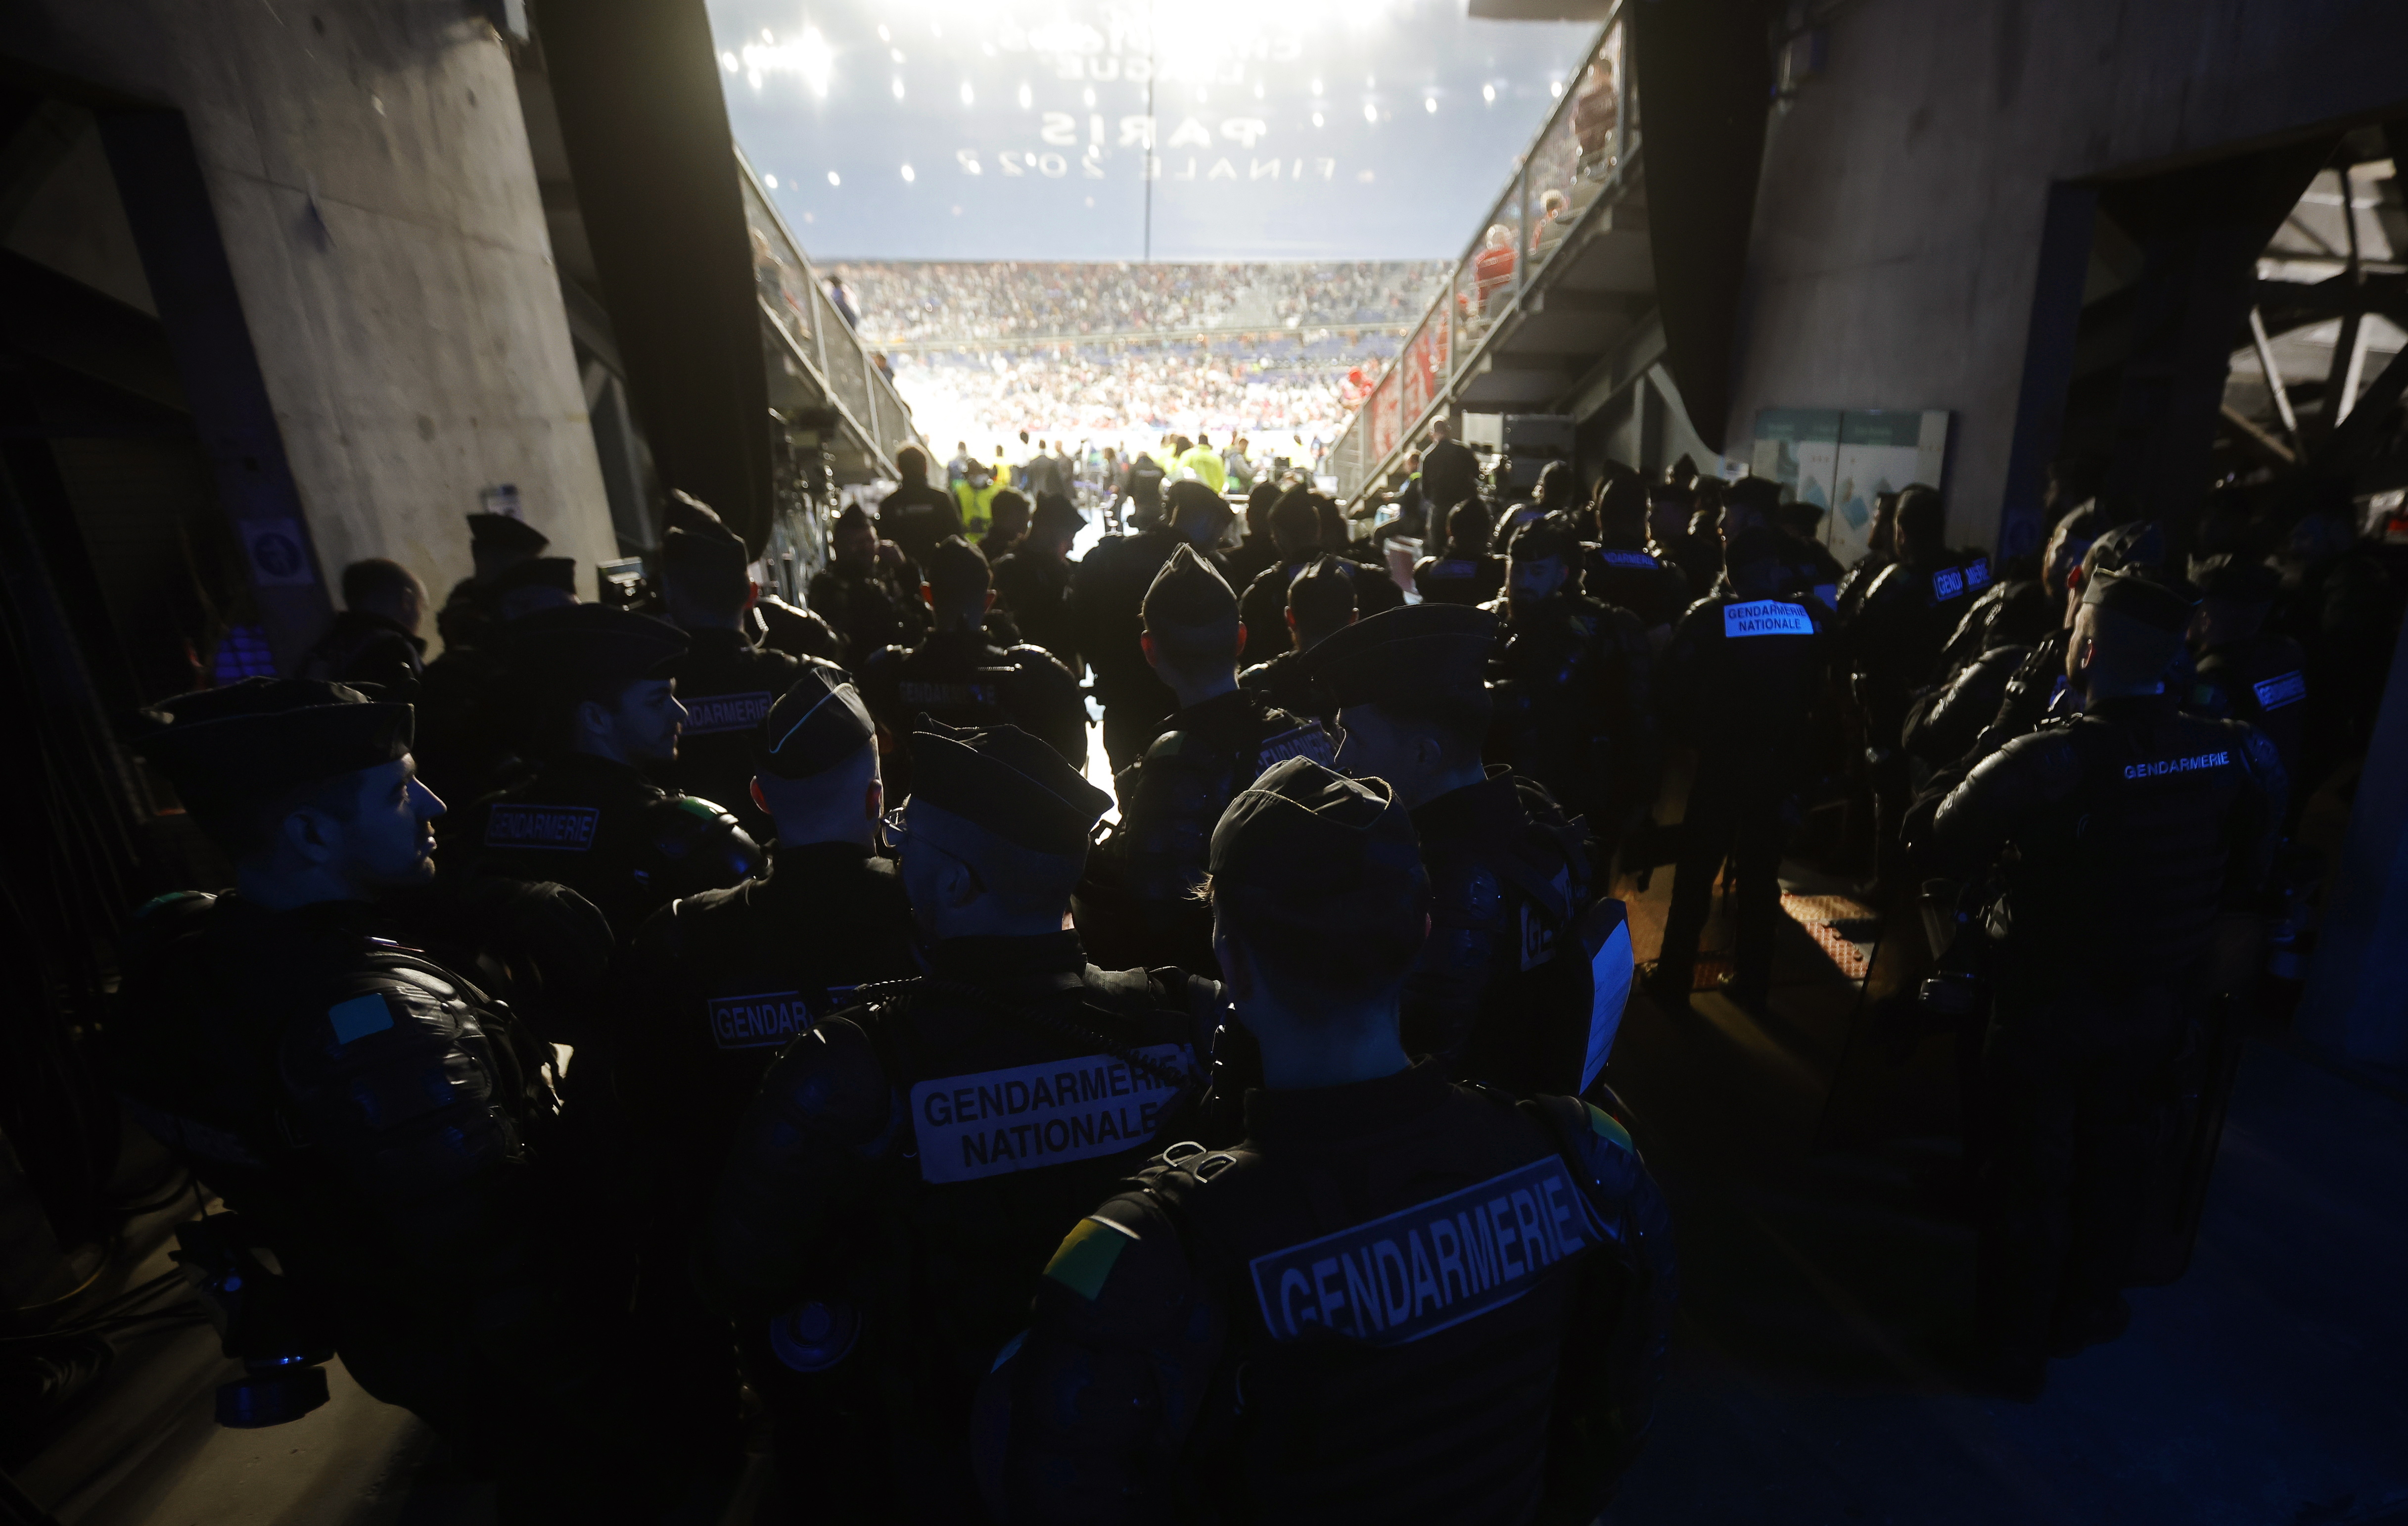 A group of policemen in one of the access tunnels to the Stade de France in Saint-Denis